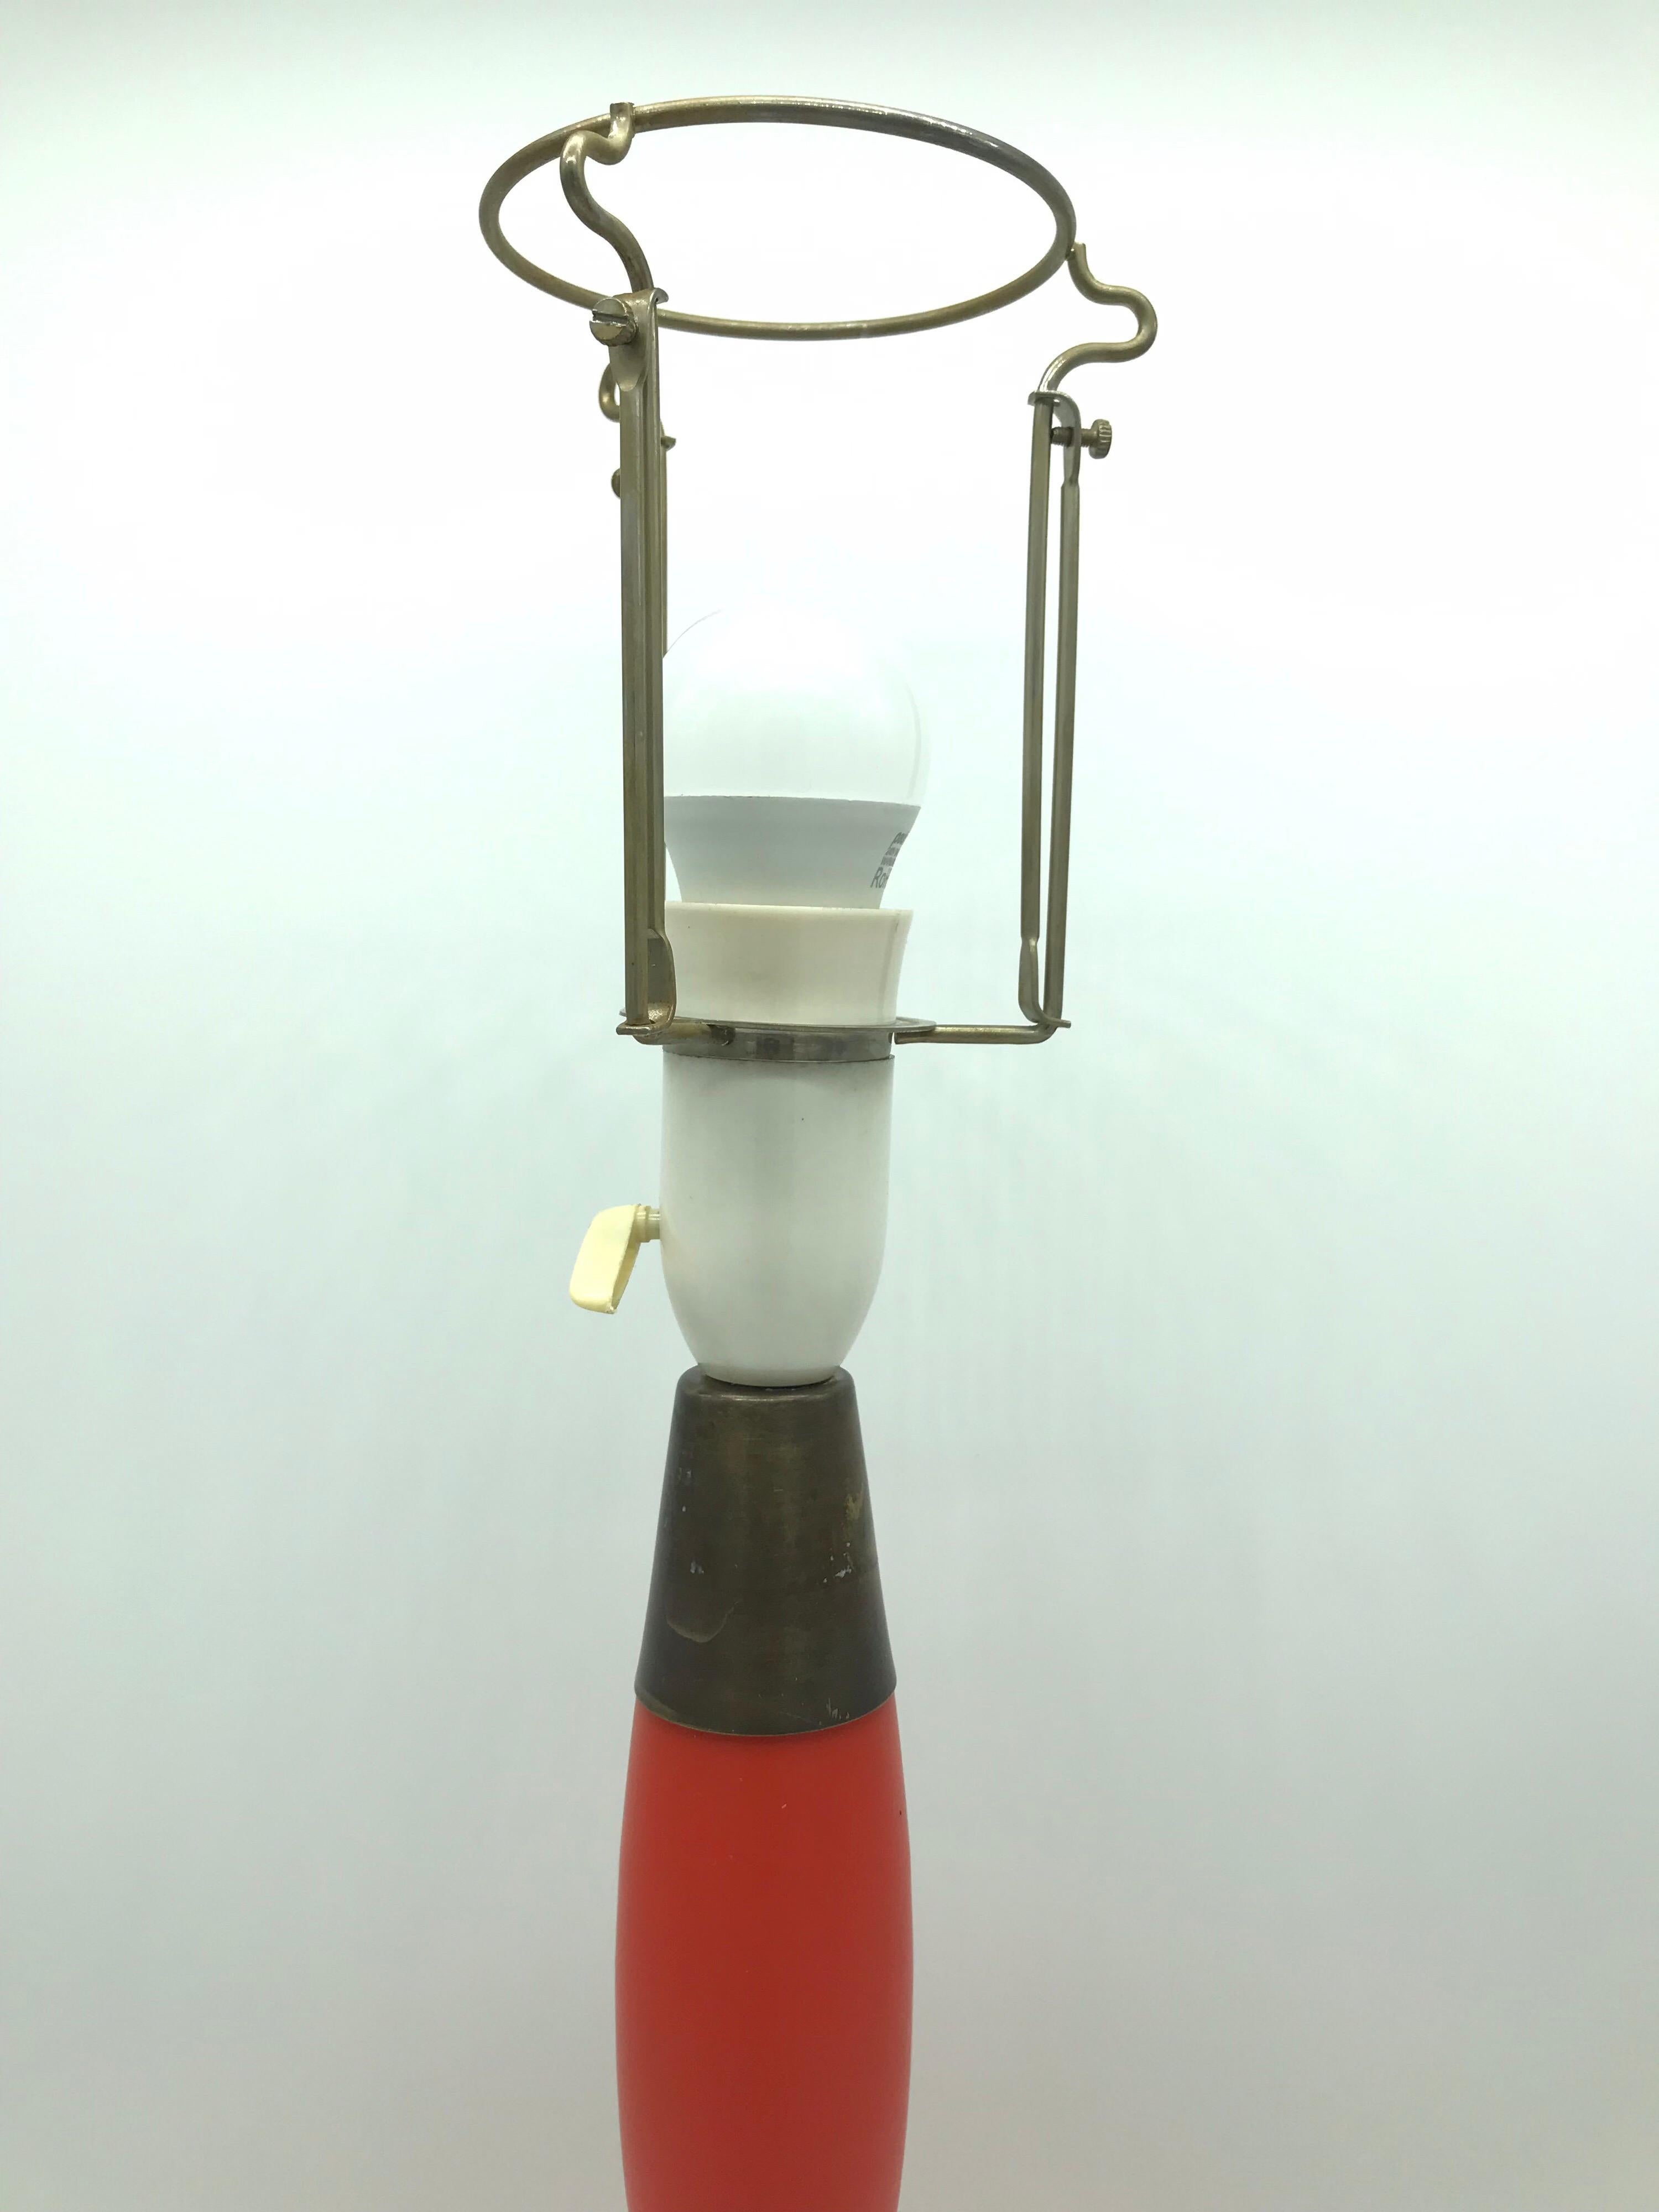 Stunning Retro Vintage Table Lamp from the 1960s Made by Kastrup Glass Denmark 1